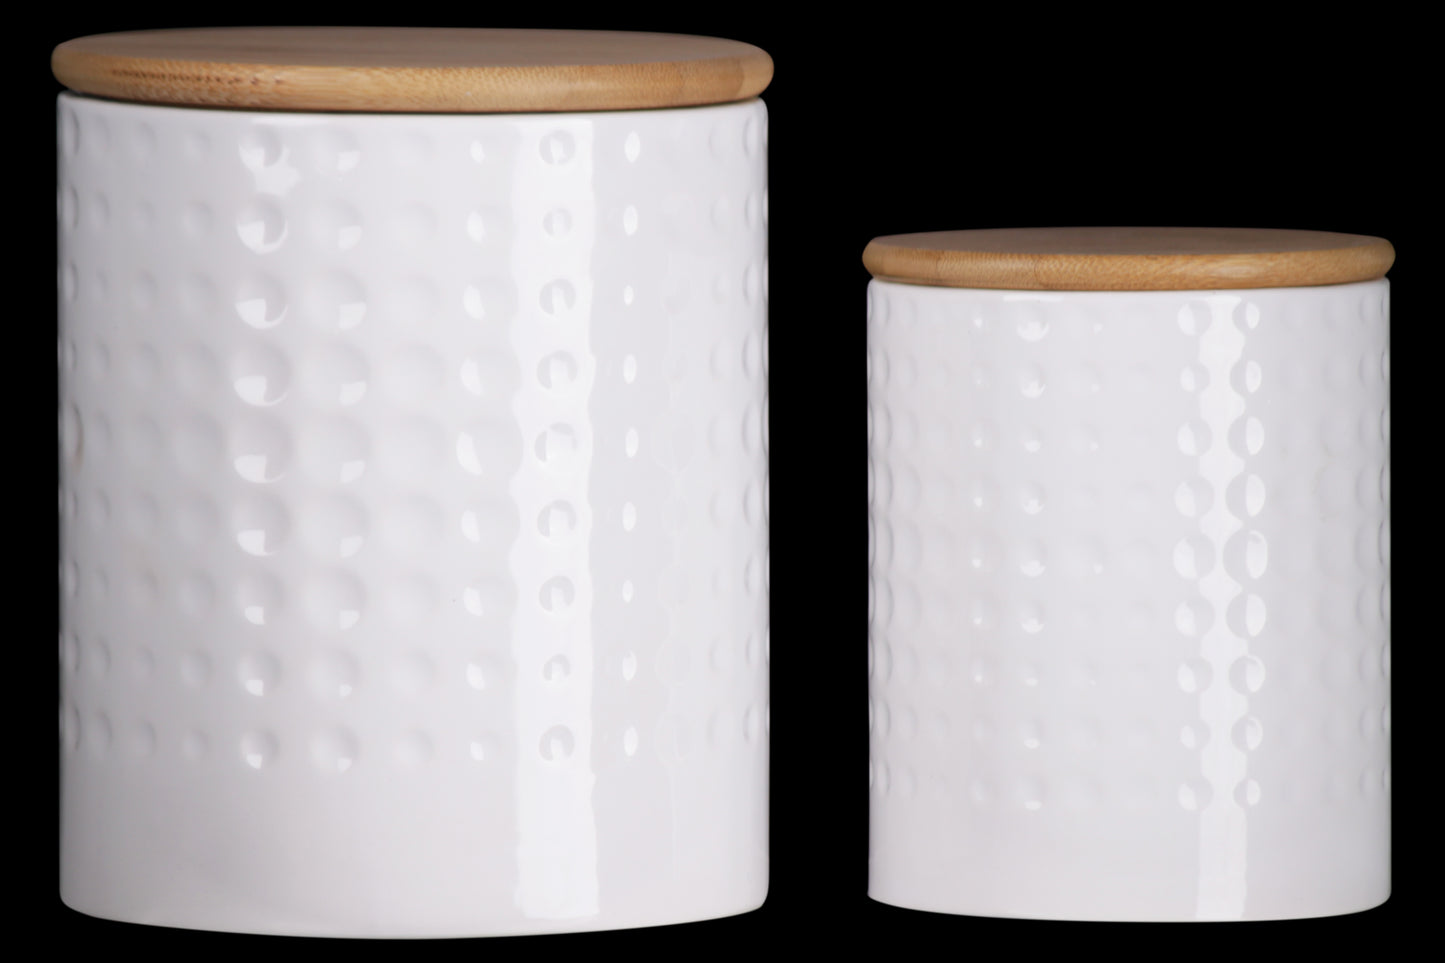 Ceramic Round Canister with Wooden Lid and Engraved Dotted Pattern Design Body, Set of 2